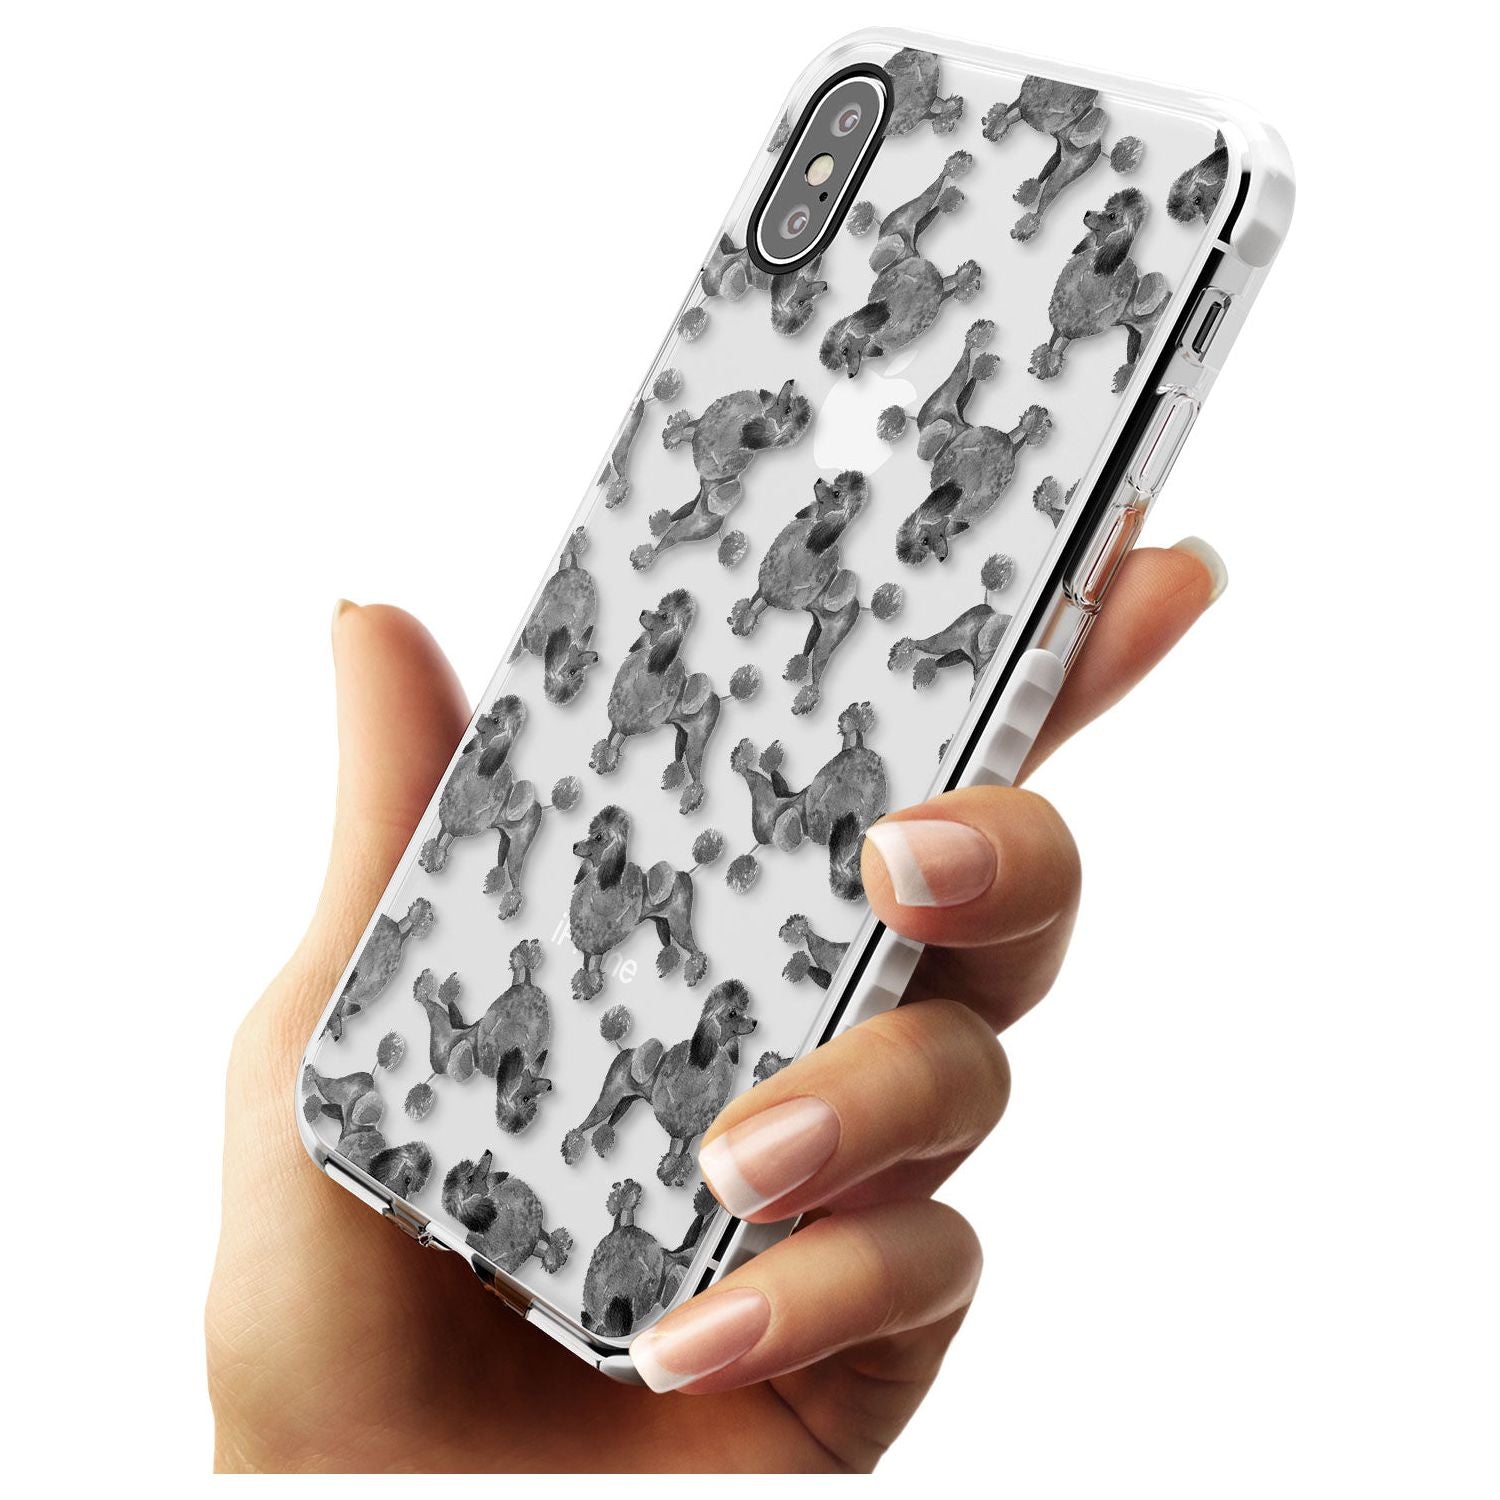 Poodle (Black) Watercolour Dog Pattern Impact Phone Case for iPhone X XS Max XR